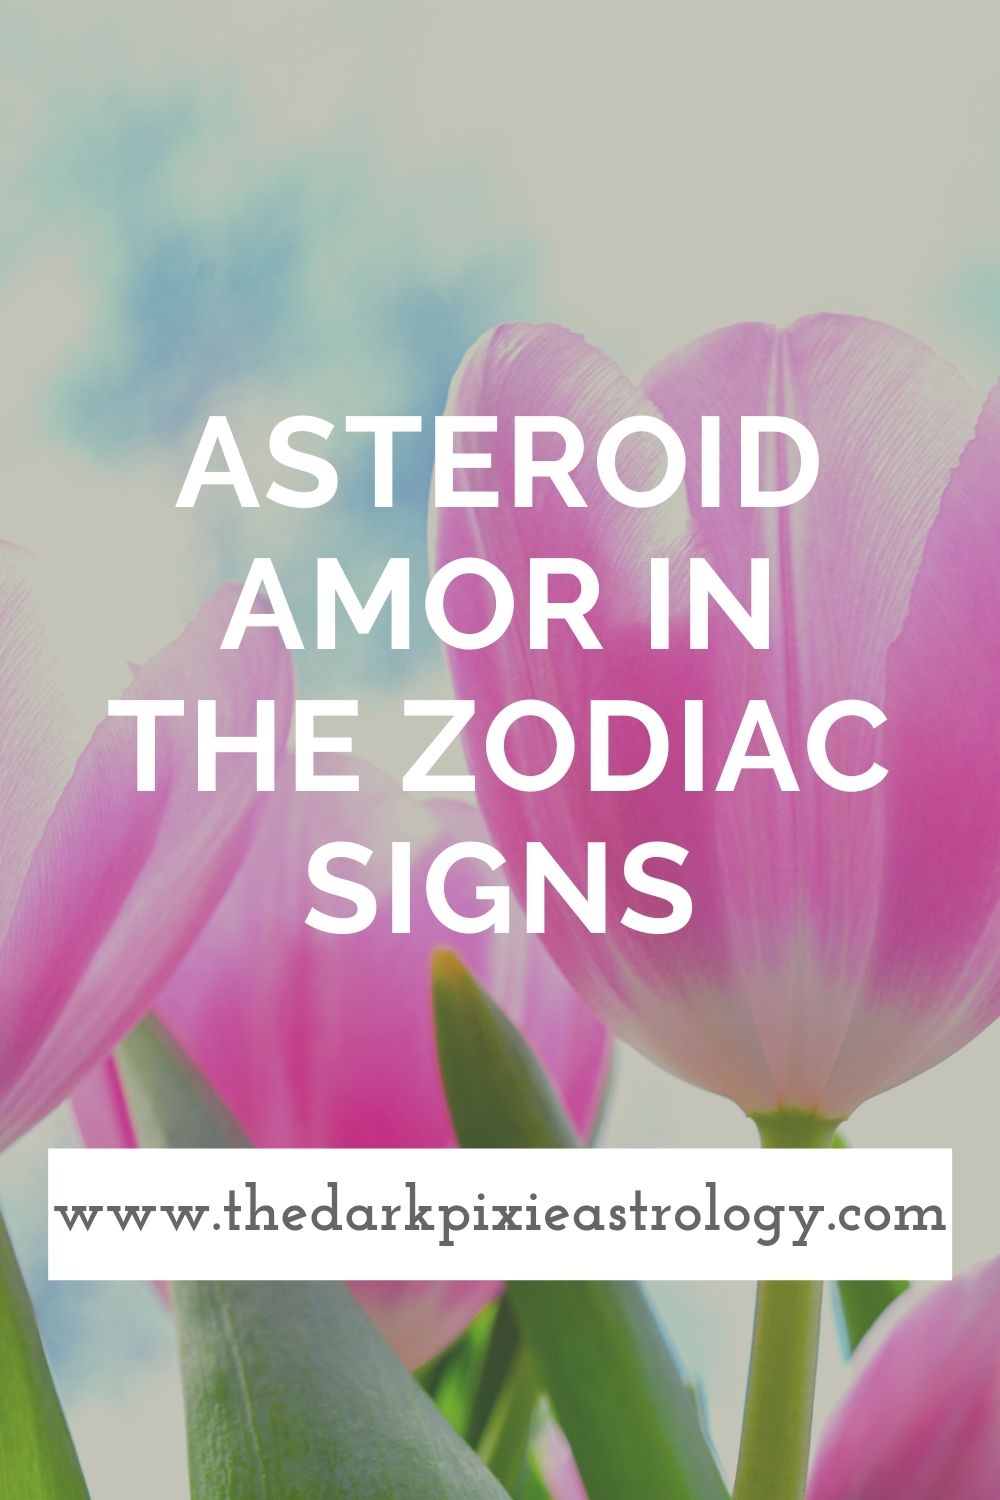 Asteroid Amor in the Zodiac Signs - The Dark Pixie Astrology